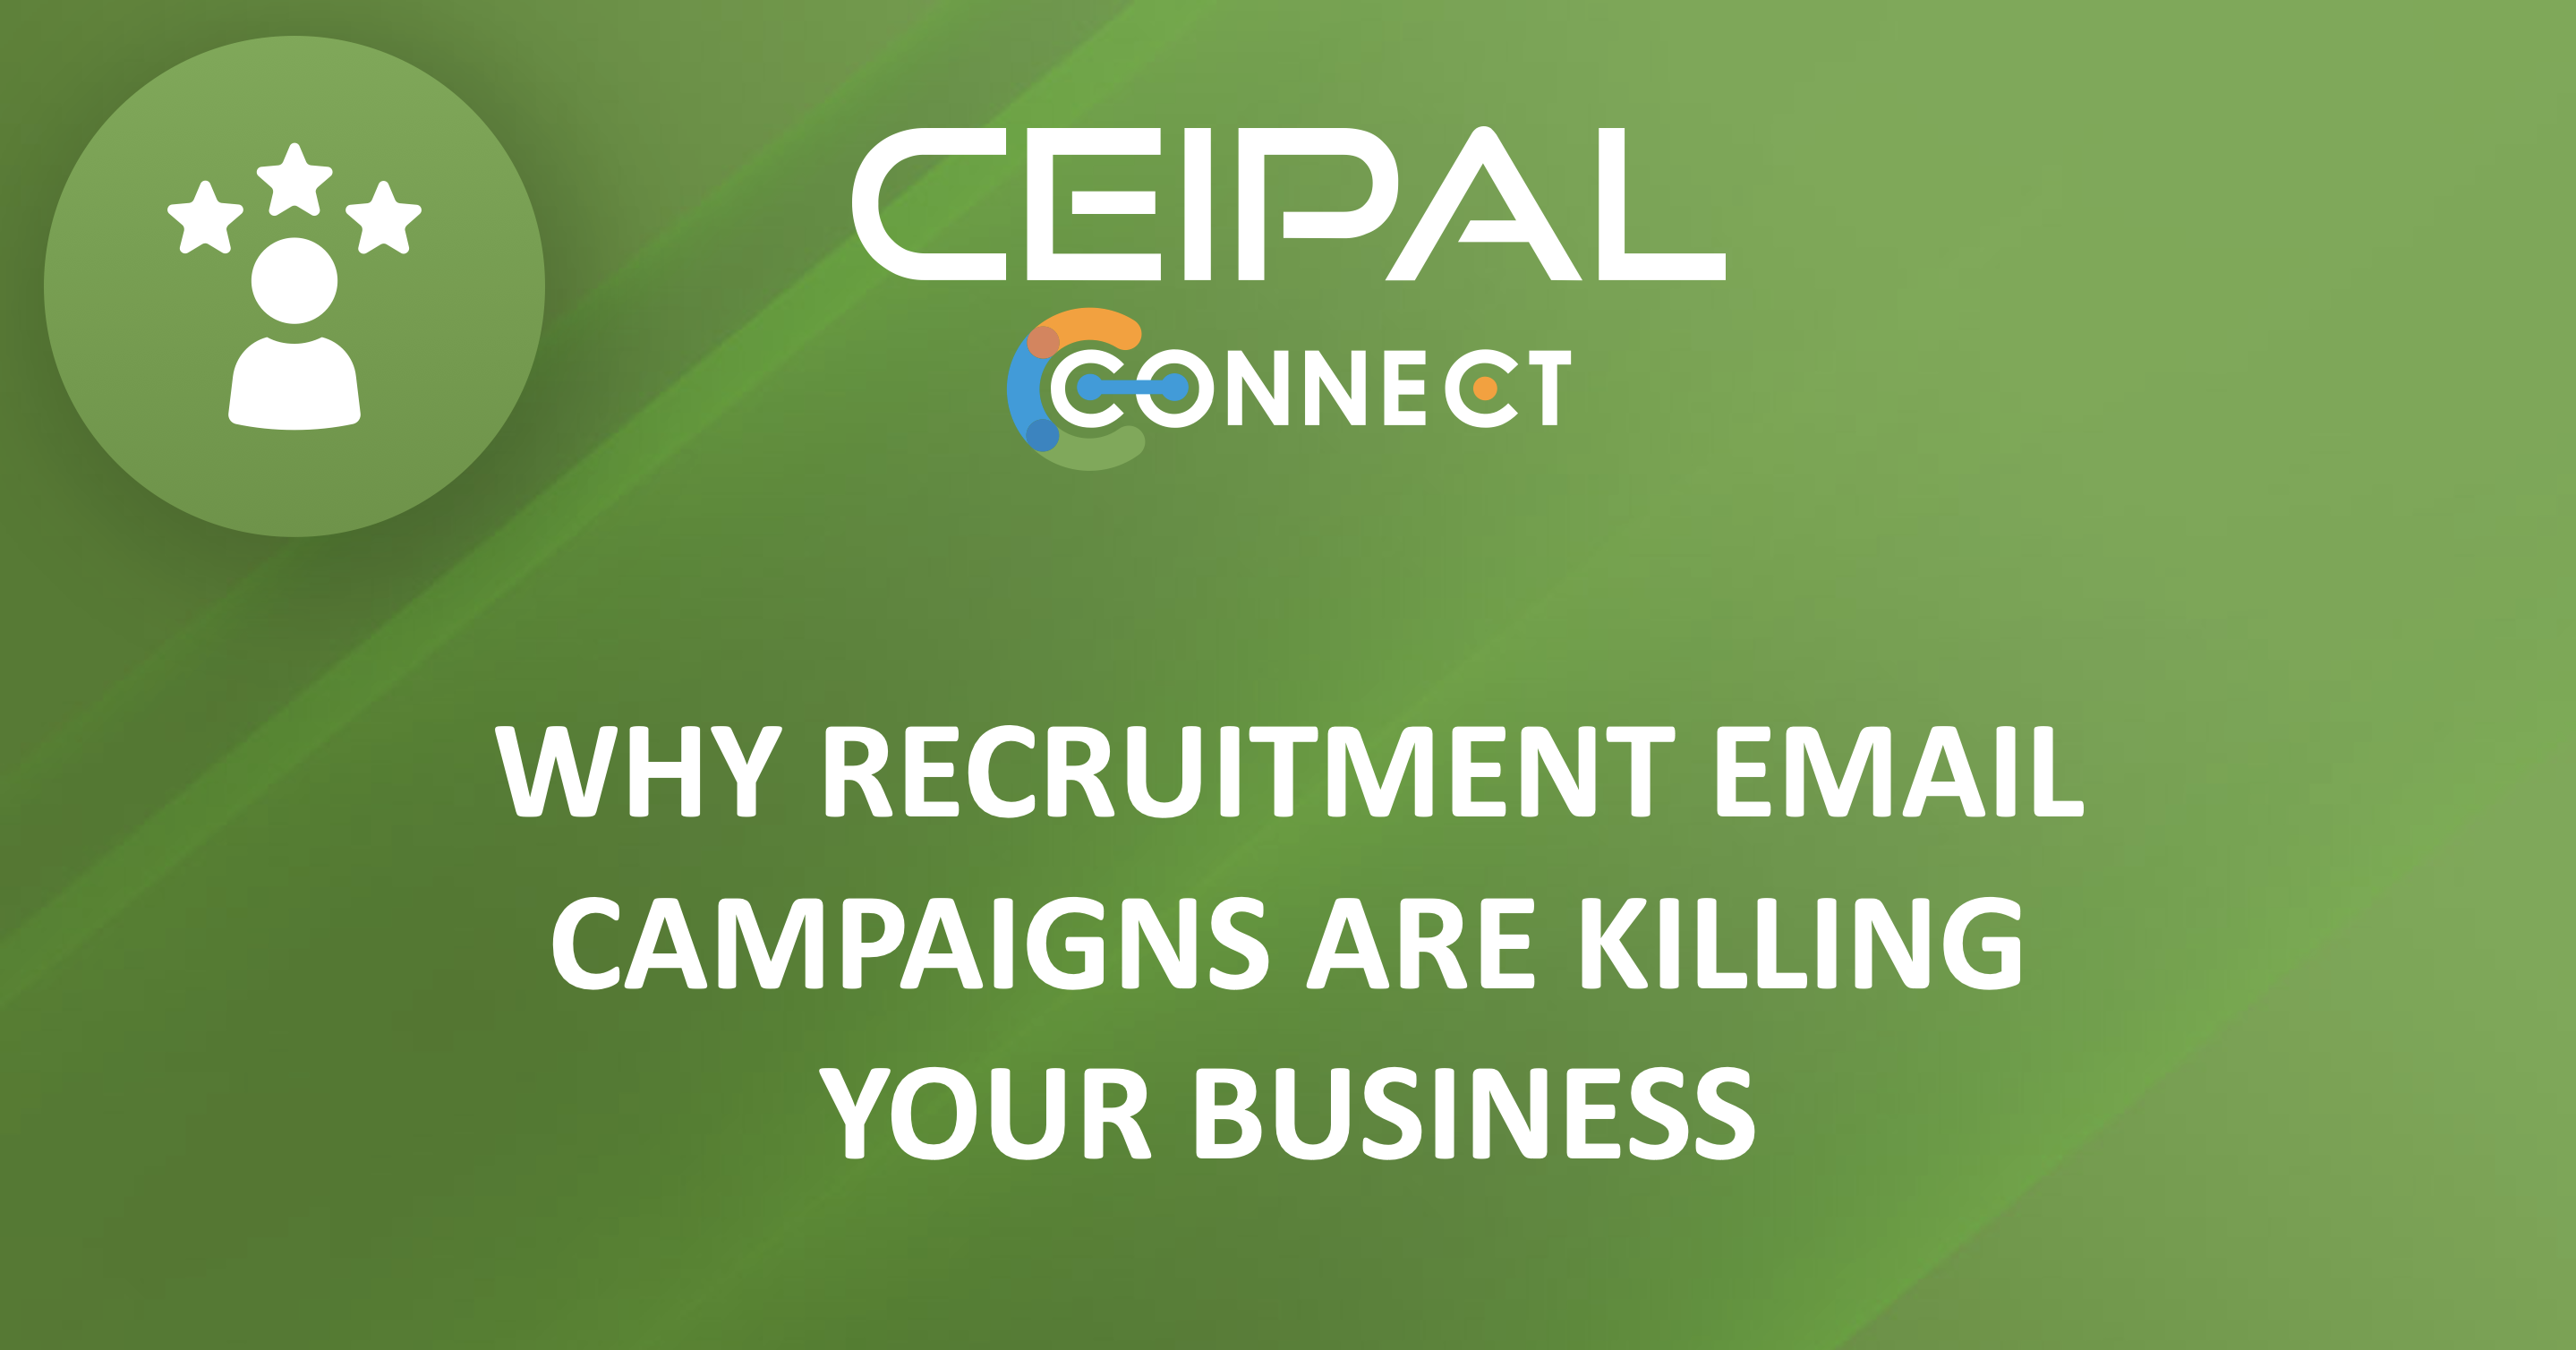 Why Recruitment Email Campaigns Are Killing Your Business